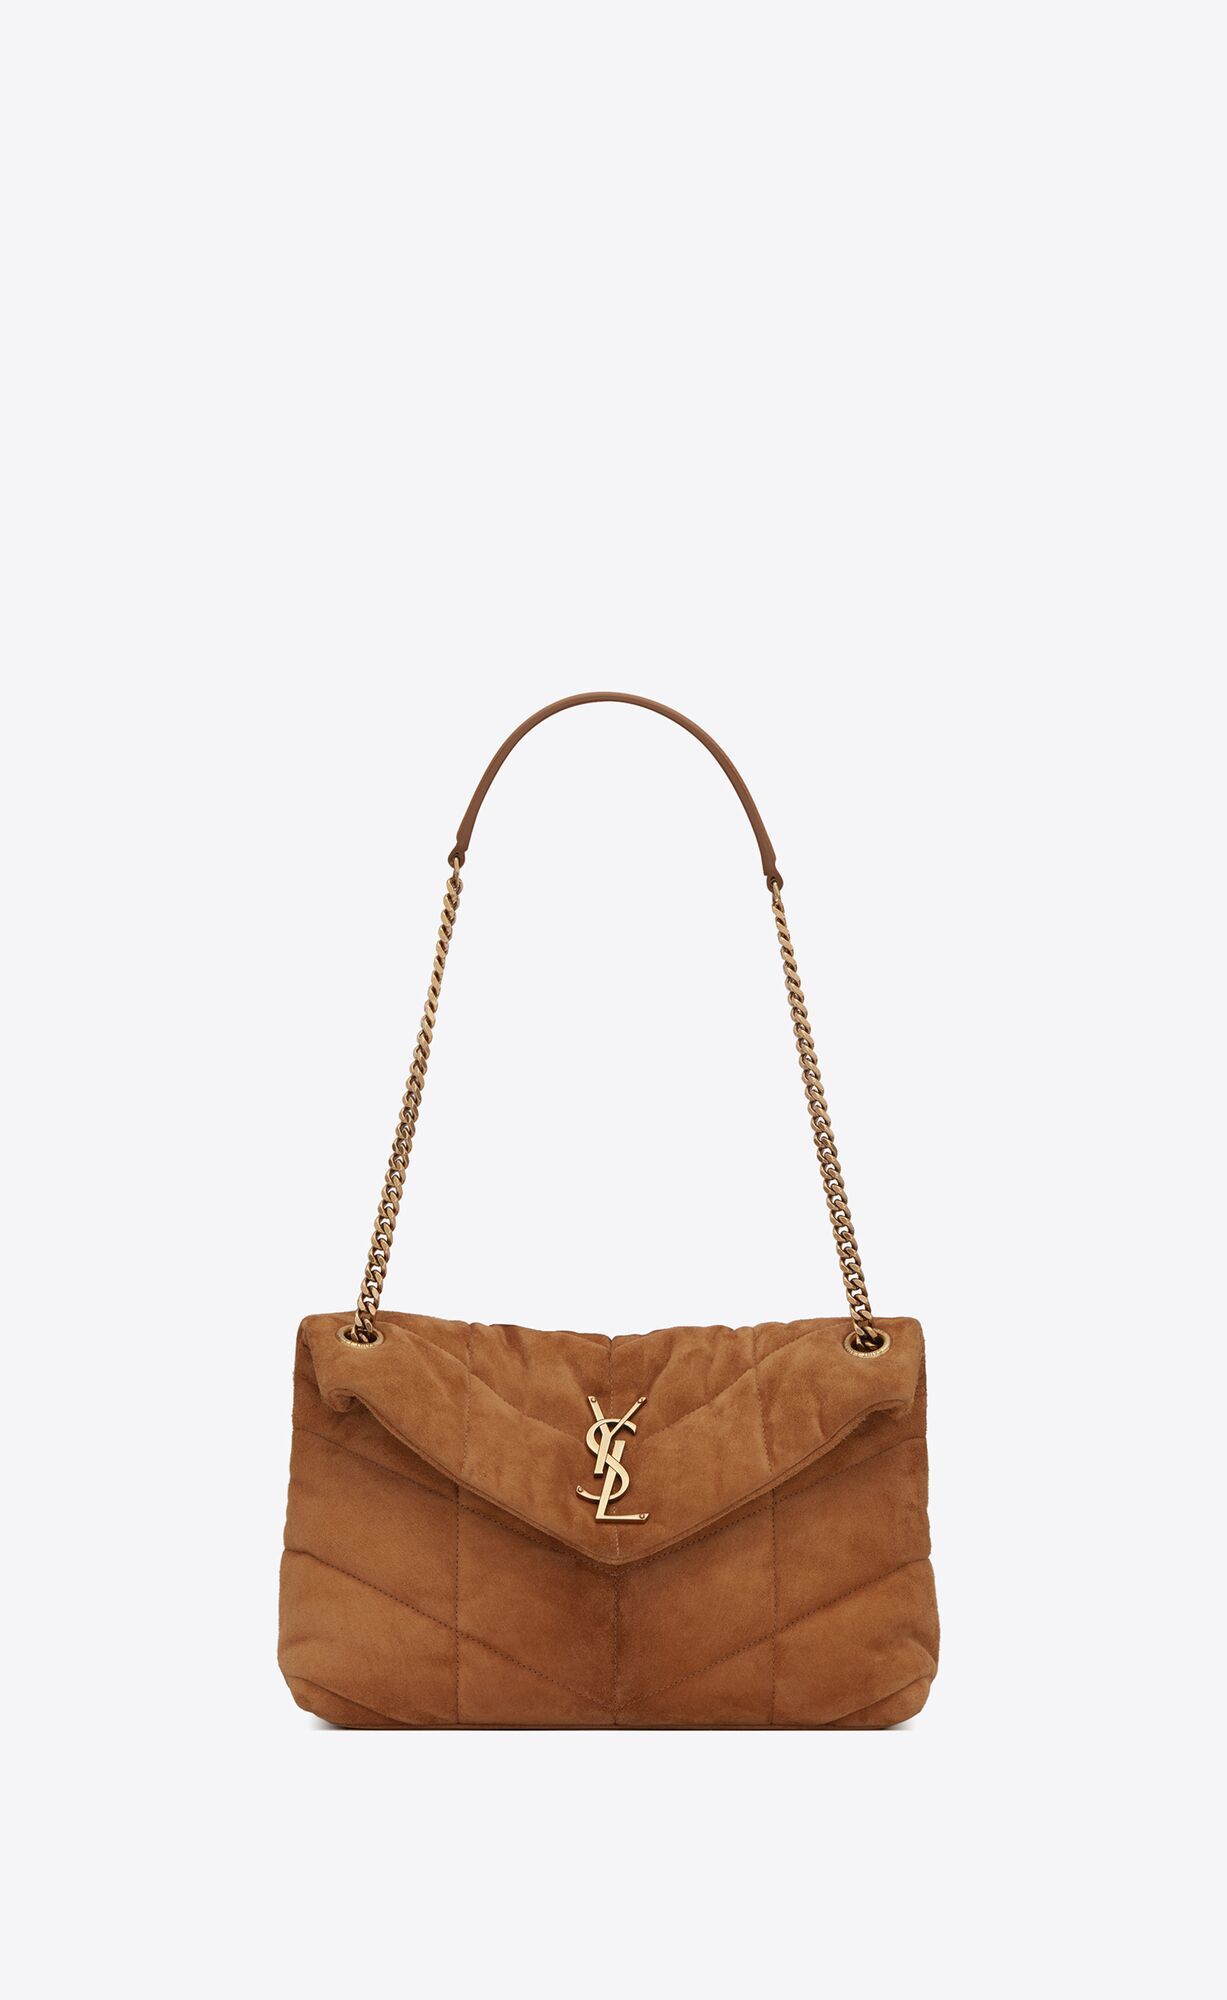 PUFFER Small bag in quilted suede | Saint Laurent | YSL.com | Saint Laurent Inc. (Global)